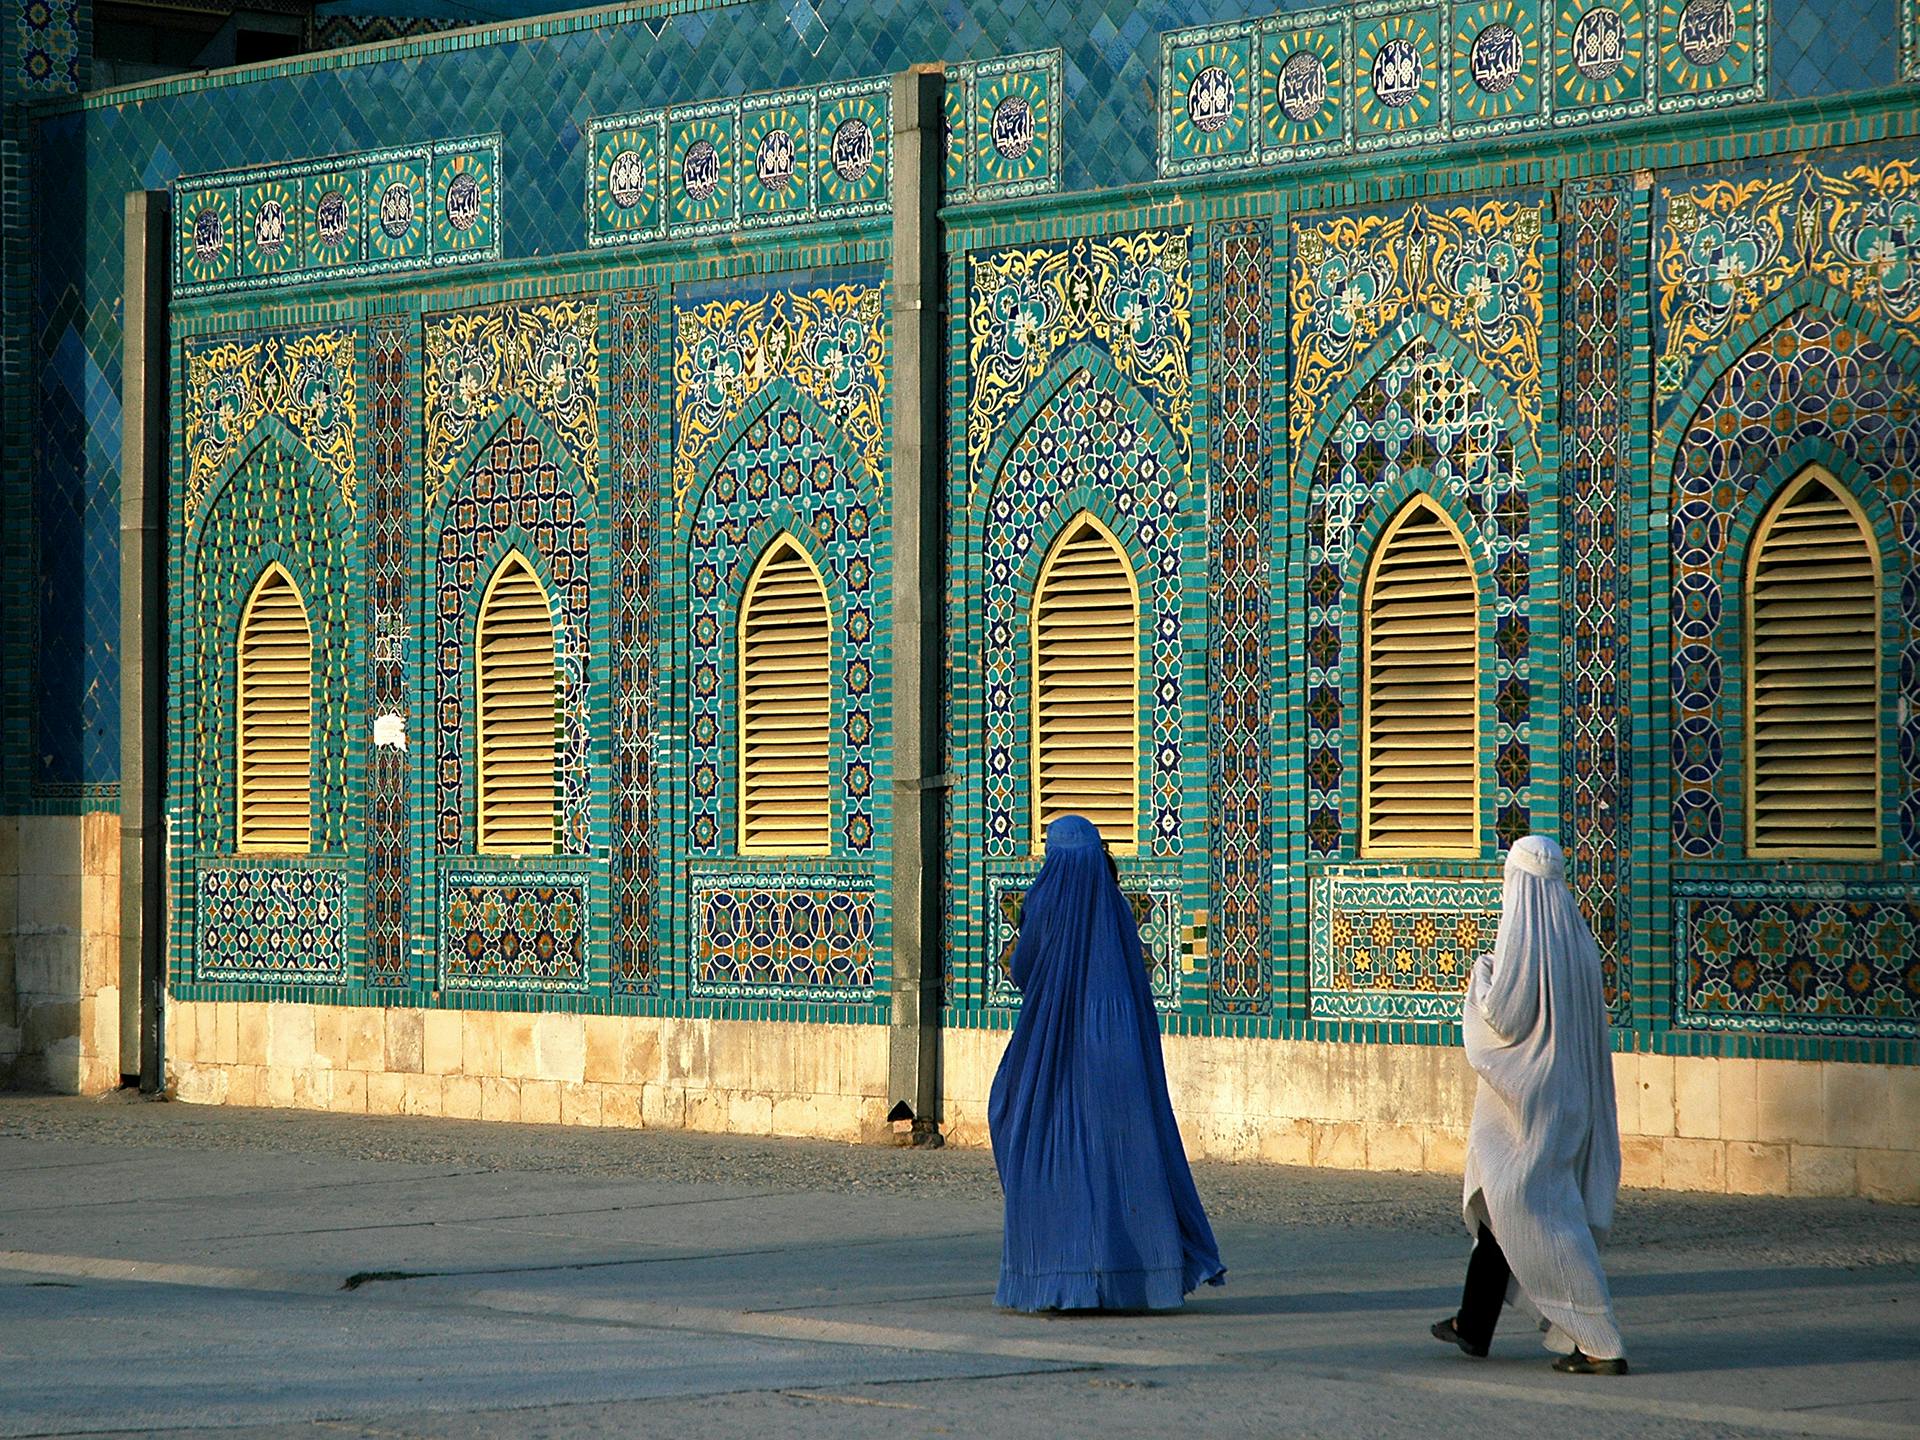 Two women wering burqas seen from behind, walking past a mosque.